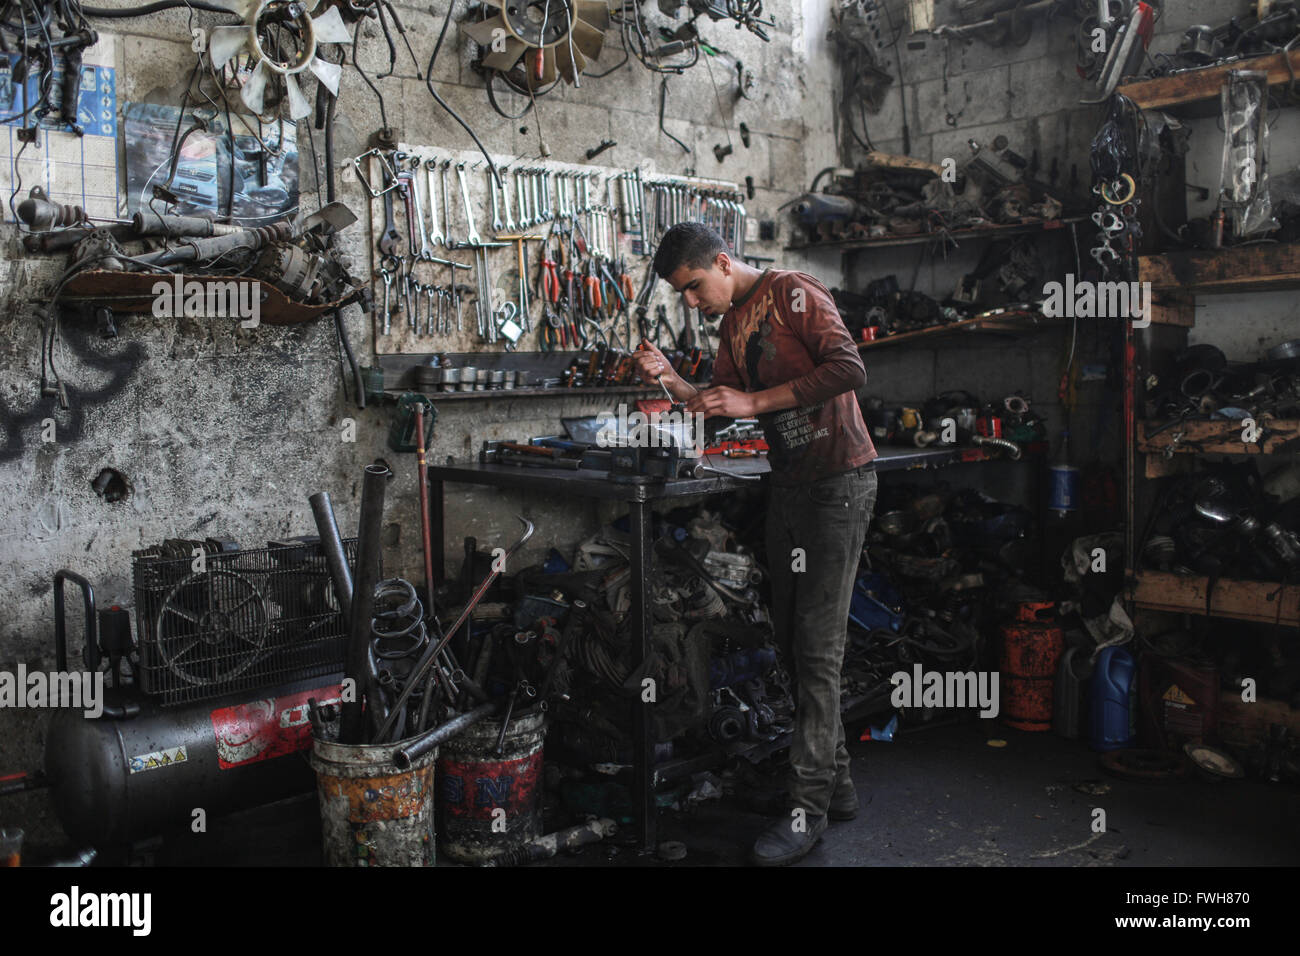 Gaza. 5th Apr, 2016. Palestinian boy Debes Talateni, 13, who works as a mechanic to help his father support their family is seen at a garage in Gaza City on April 5, 2016. Many Palestinian young boys are trying to make a living and support their family. © Wissam Nassar/Xinhua/Alamy Live News Stock Photo